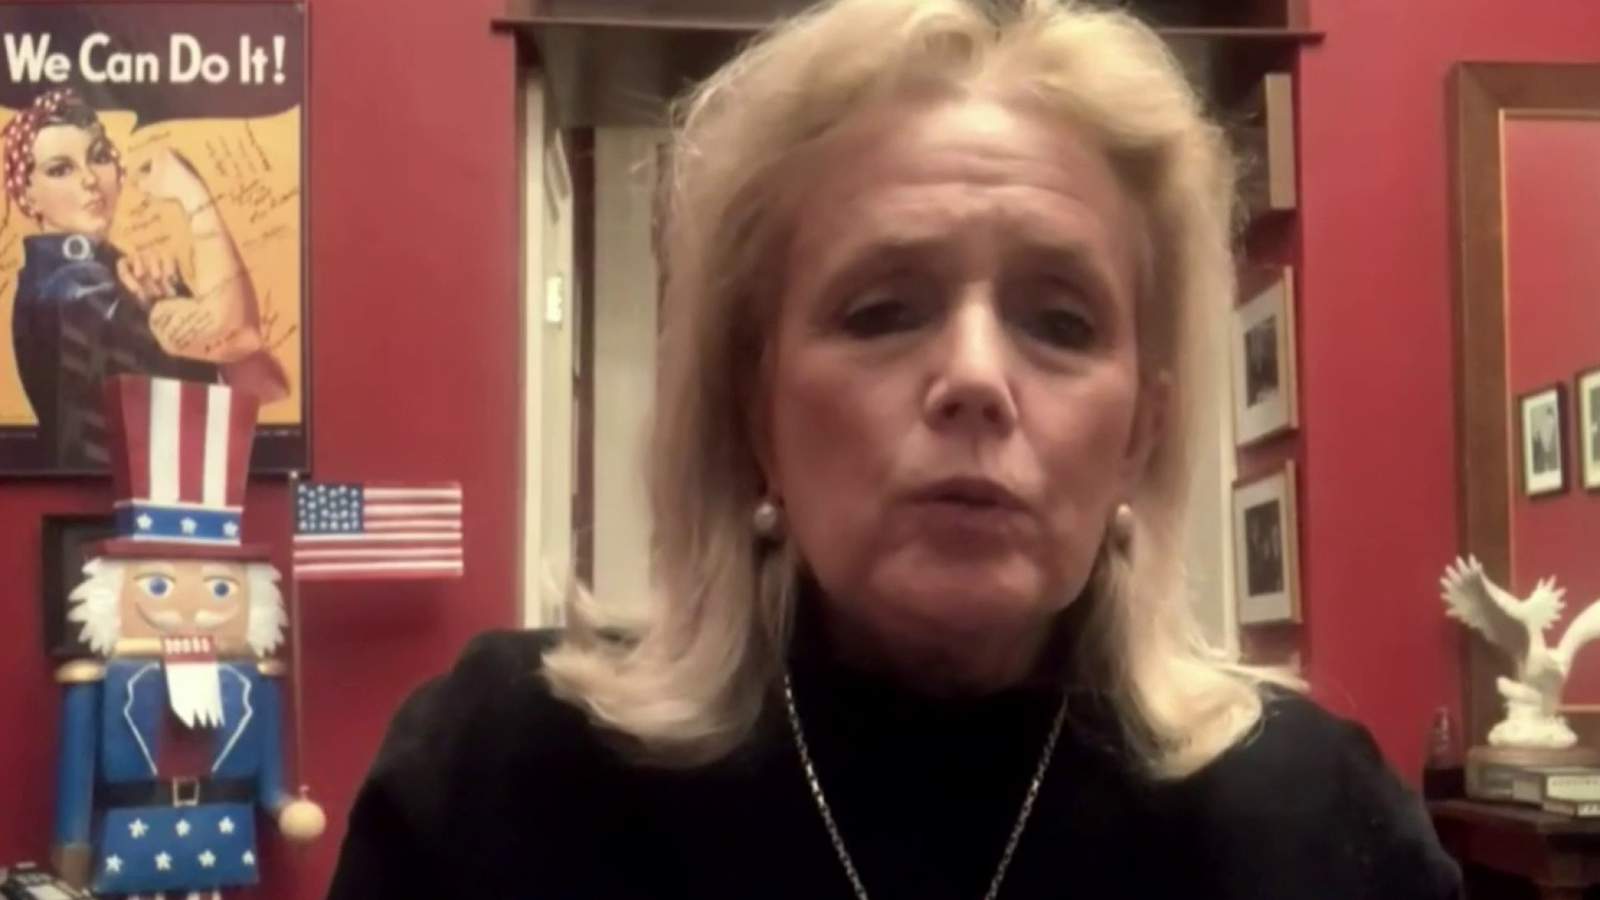 Michigan Rep. Debbie Dingell on Capitol riot: ‘They were attacking what is the symbol of our country and our democracy’